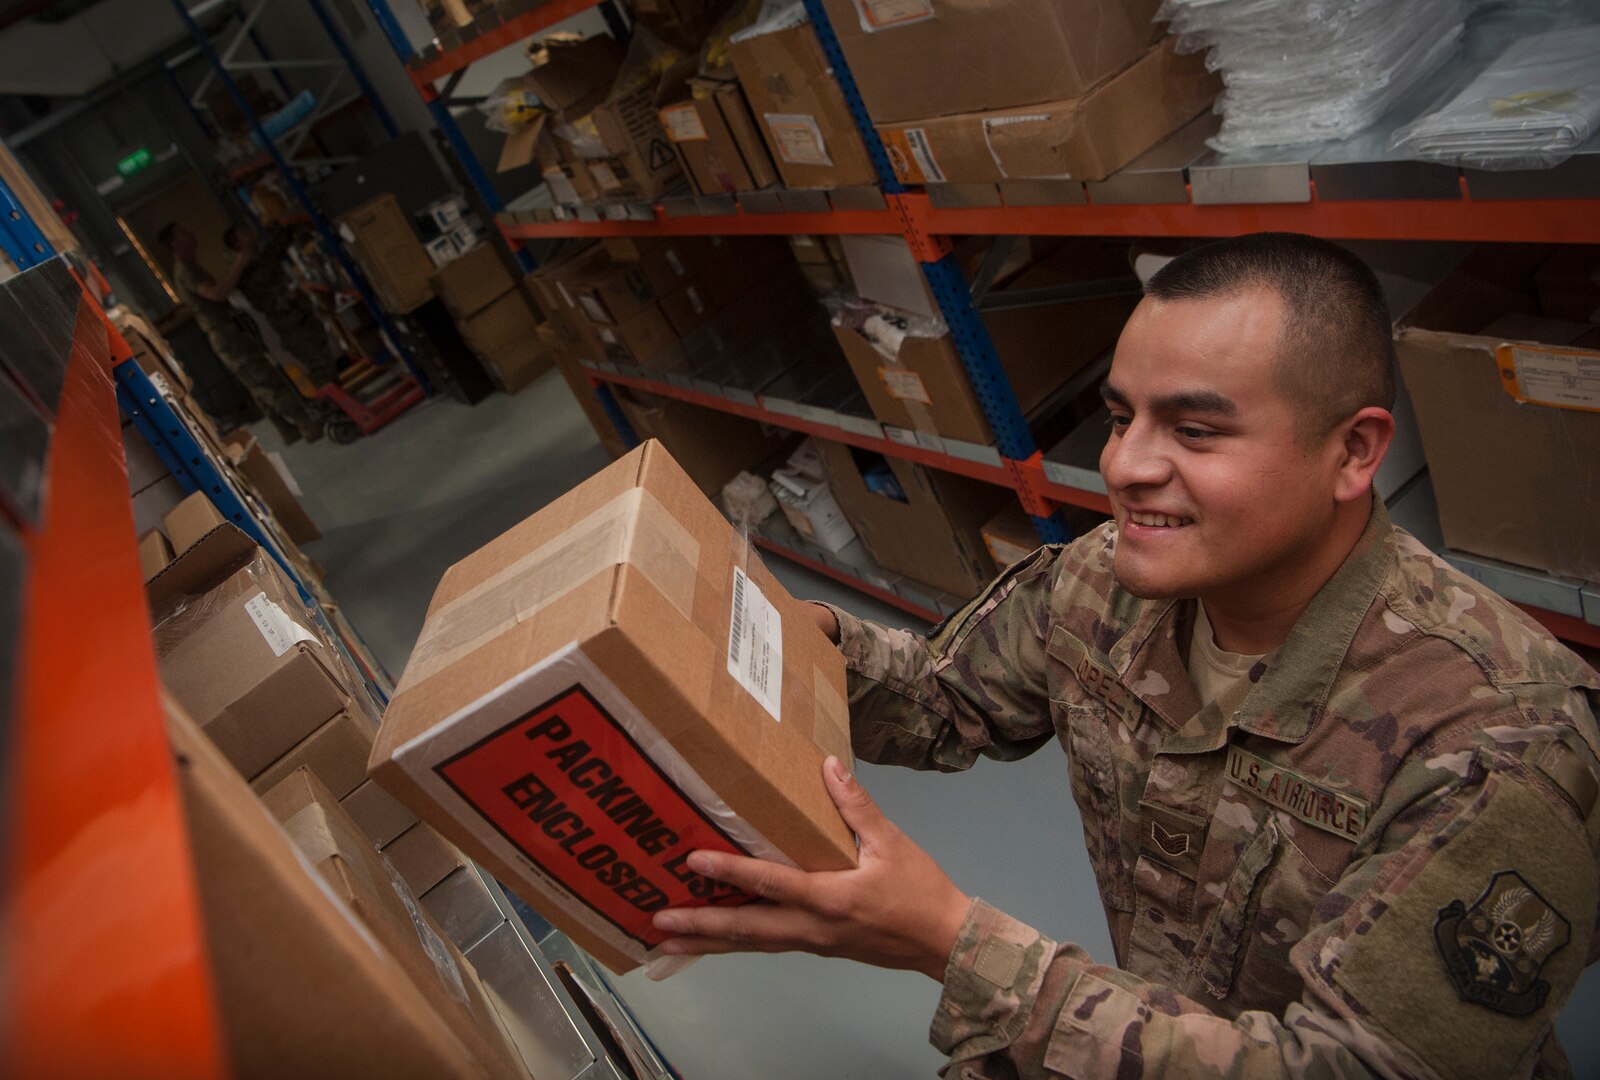 Staff Sgt. Mario Lopez, 379th Expeditionary Logistics Readiness Squadron materiel management craftsman, organizes boxes at the newly relocated Desert Depot Oct. 30, 2018, at Al Udeid Air Base, Qatar. The 379th ELRS recently relocated the Desert Depot, celebrating the moves completion during a ribbon cutting ceremony. The ceremony completes a two-year effort to relocate to a $1.1 million facility. Airmen of the 379th ELRS pulled together to move 42,000 assets to the new location during a four-day period. (U.S. Air Force photo by Tech. Sgt. Christopher Hubenthal)